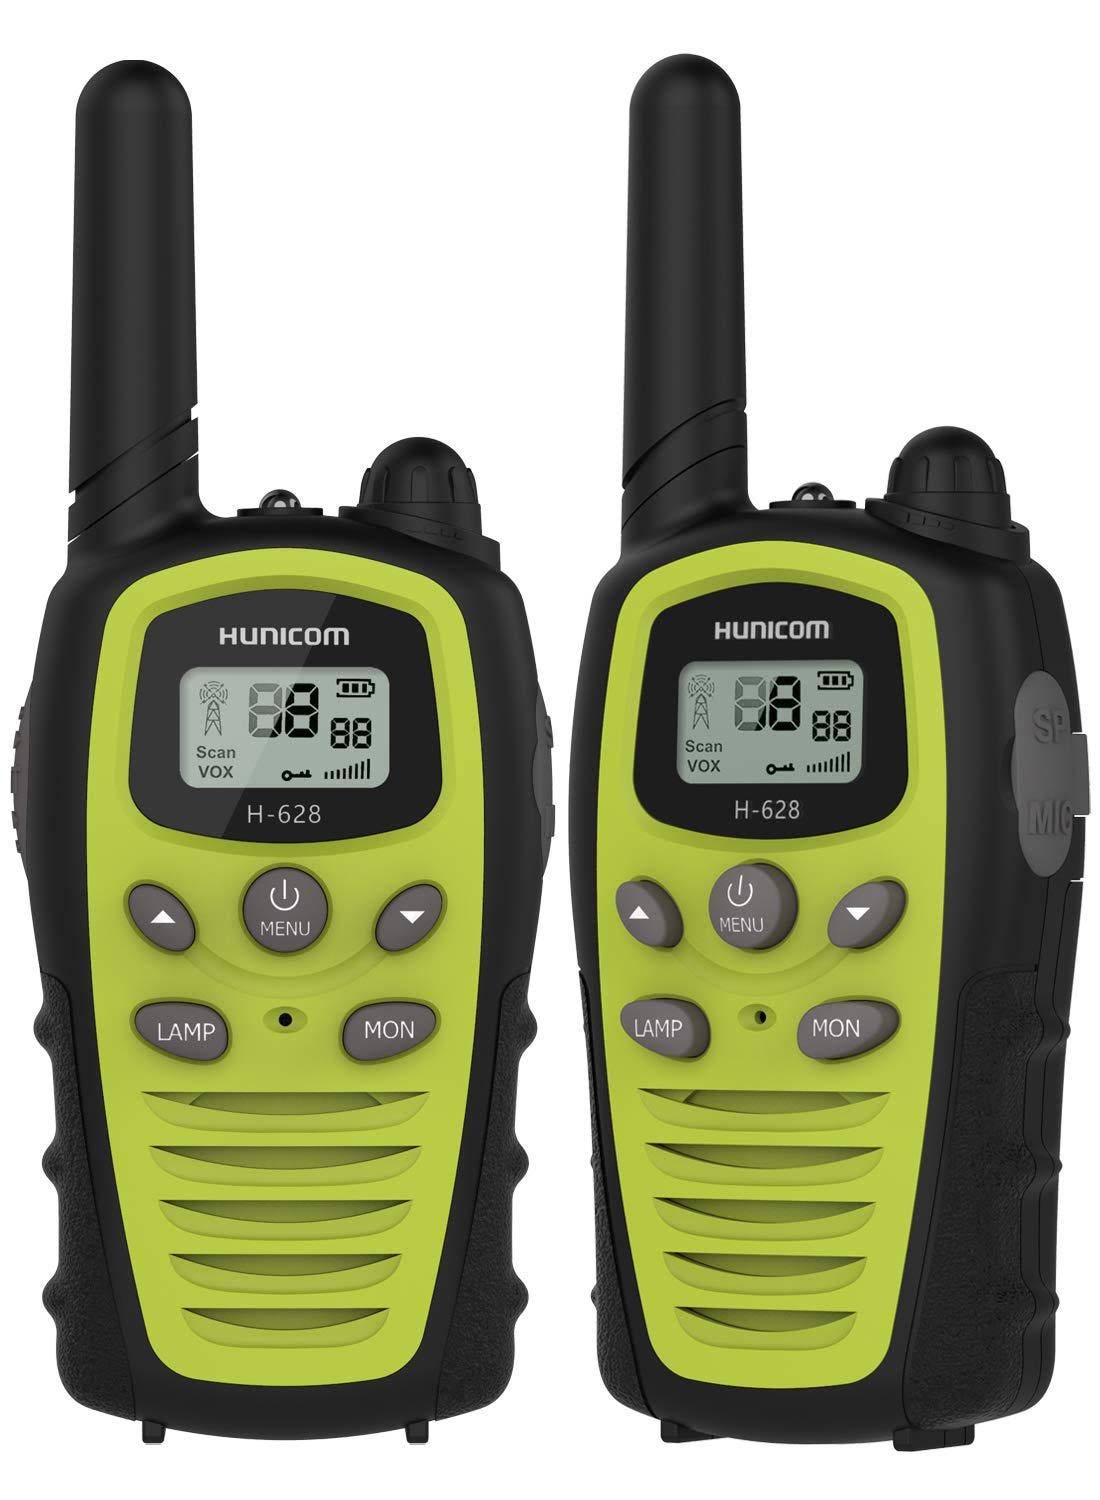 Hunicom Clear Sound Walkie Talkies for Outdoor Activities | Image